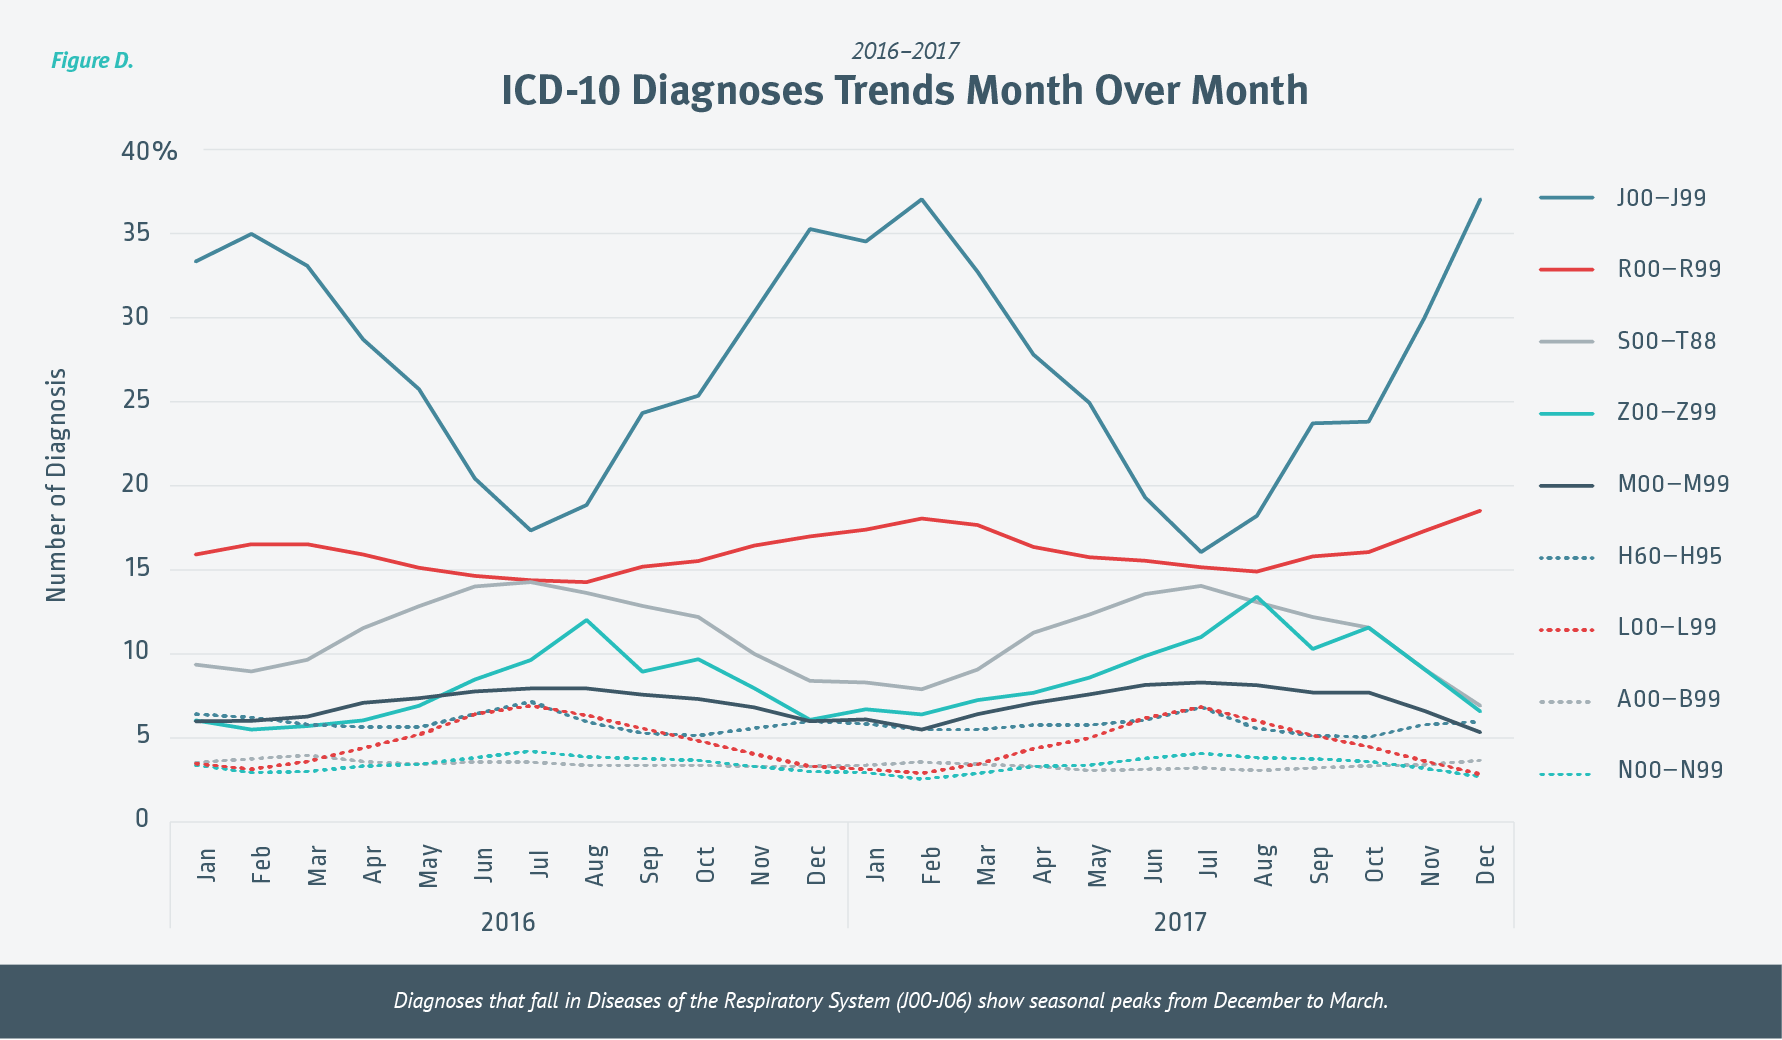 ICD-10 Diagnoses Trends Month over Month - Chart